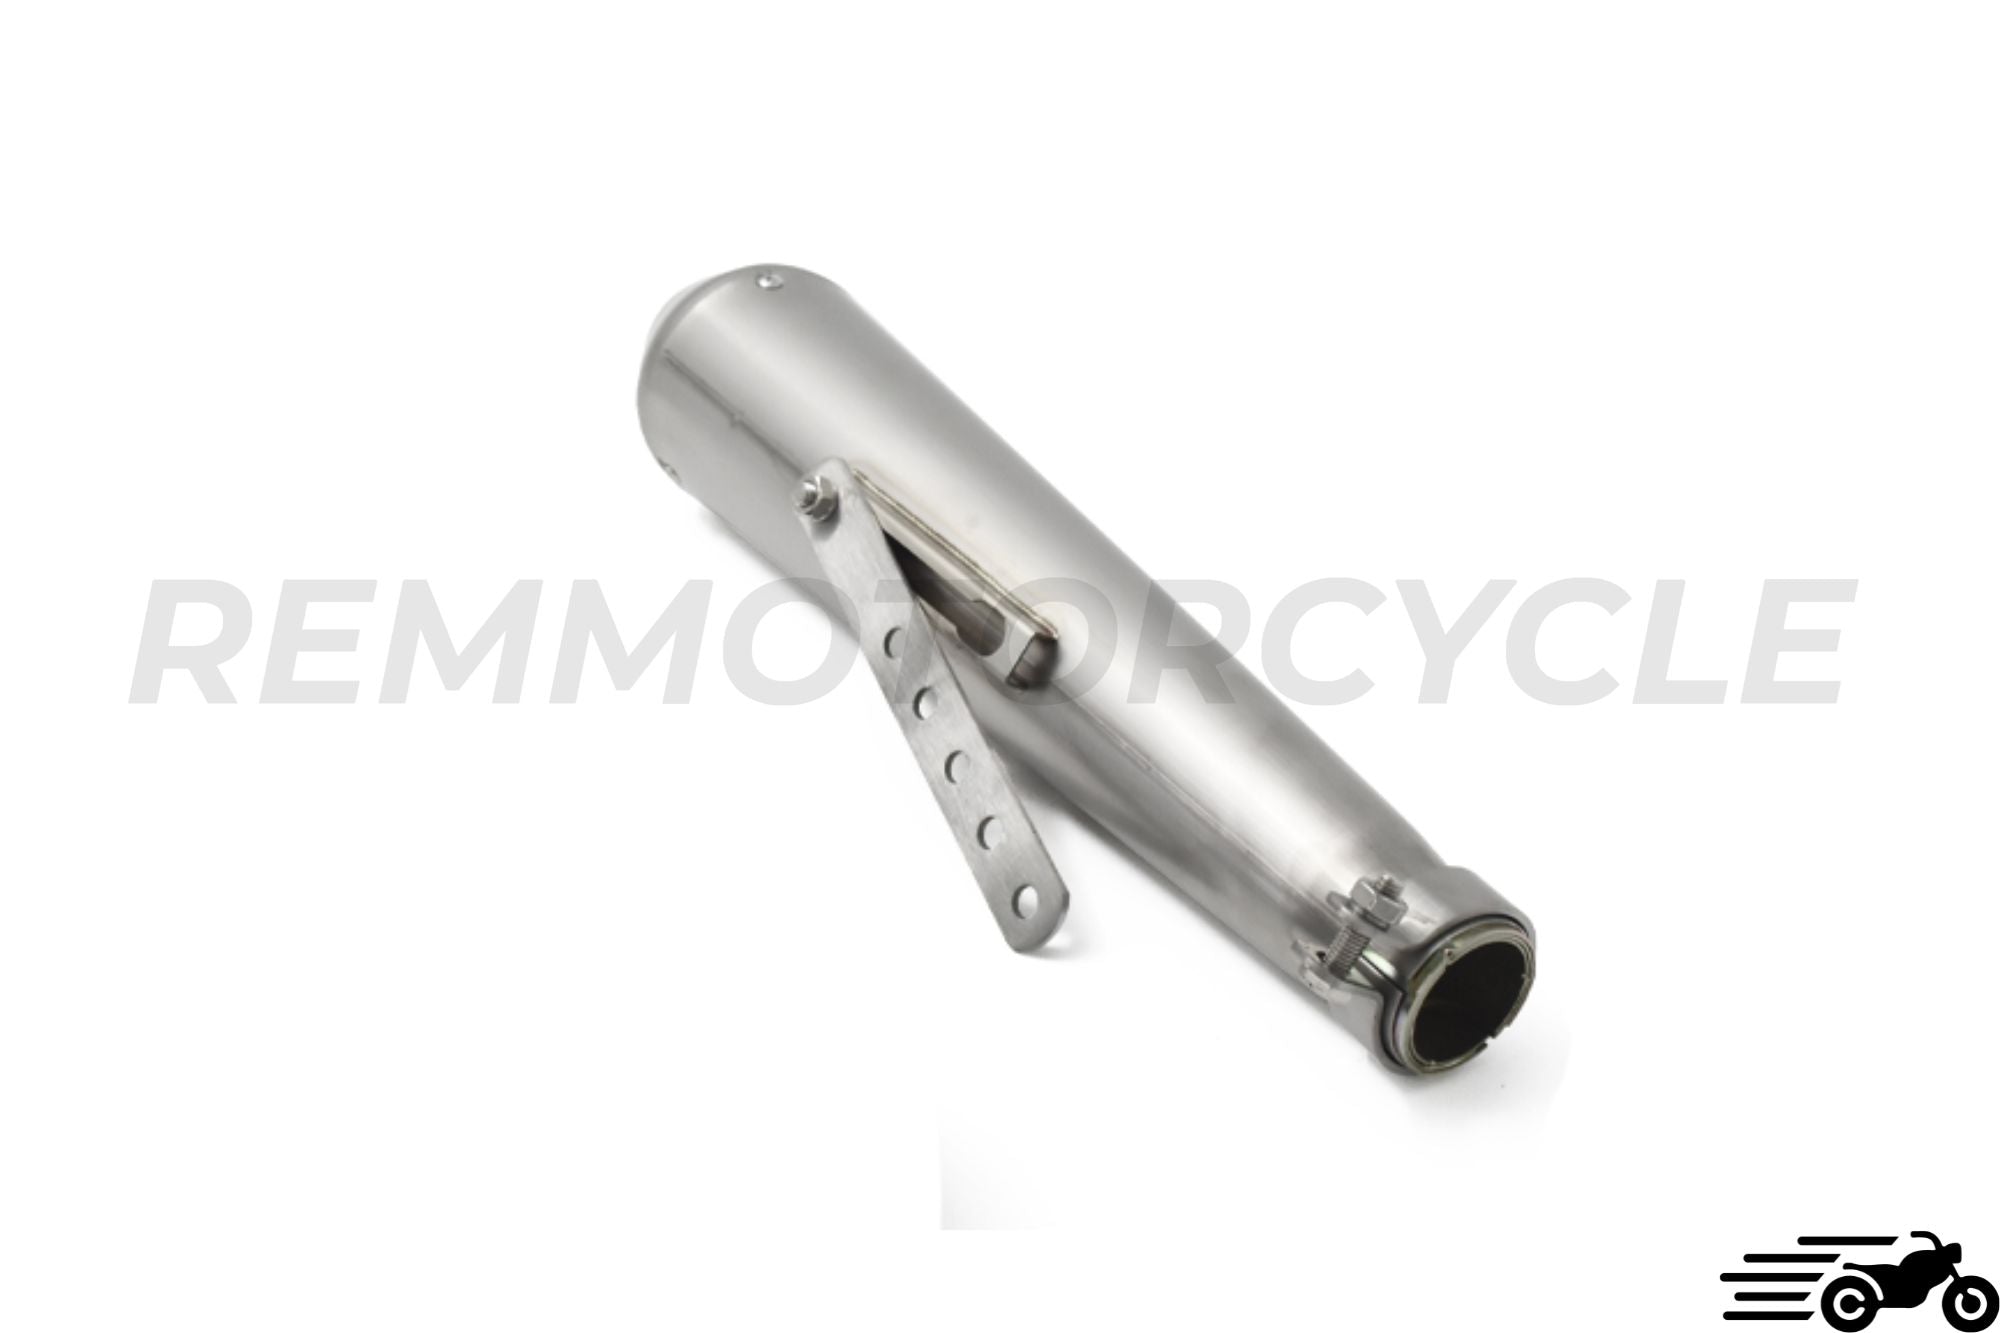 Exhaust Megaphone Cafe racer Stainless Steel with Chicane